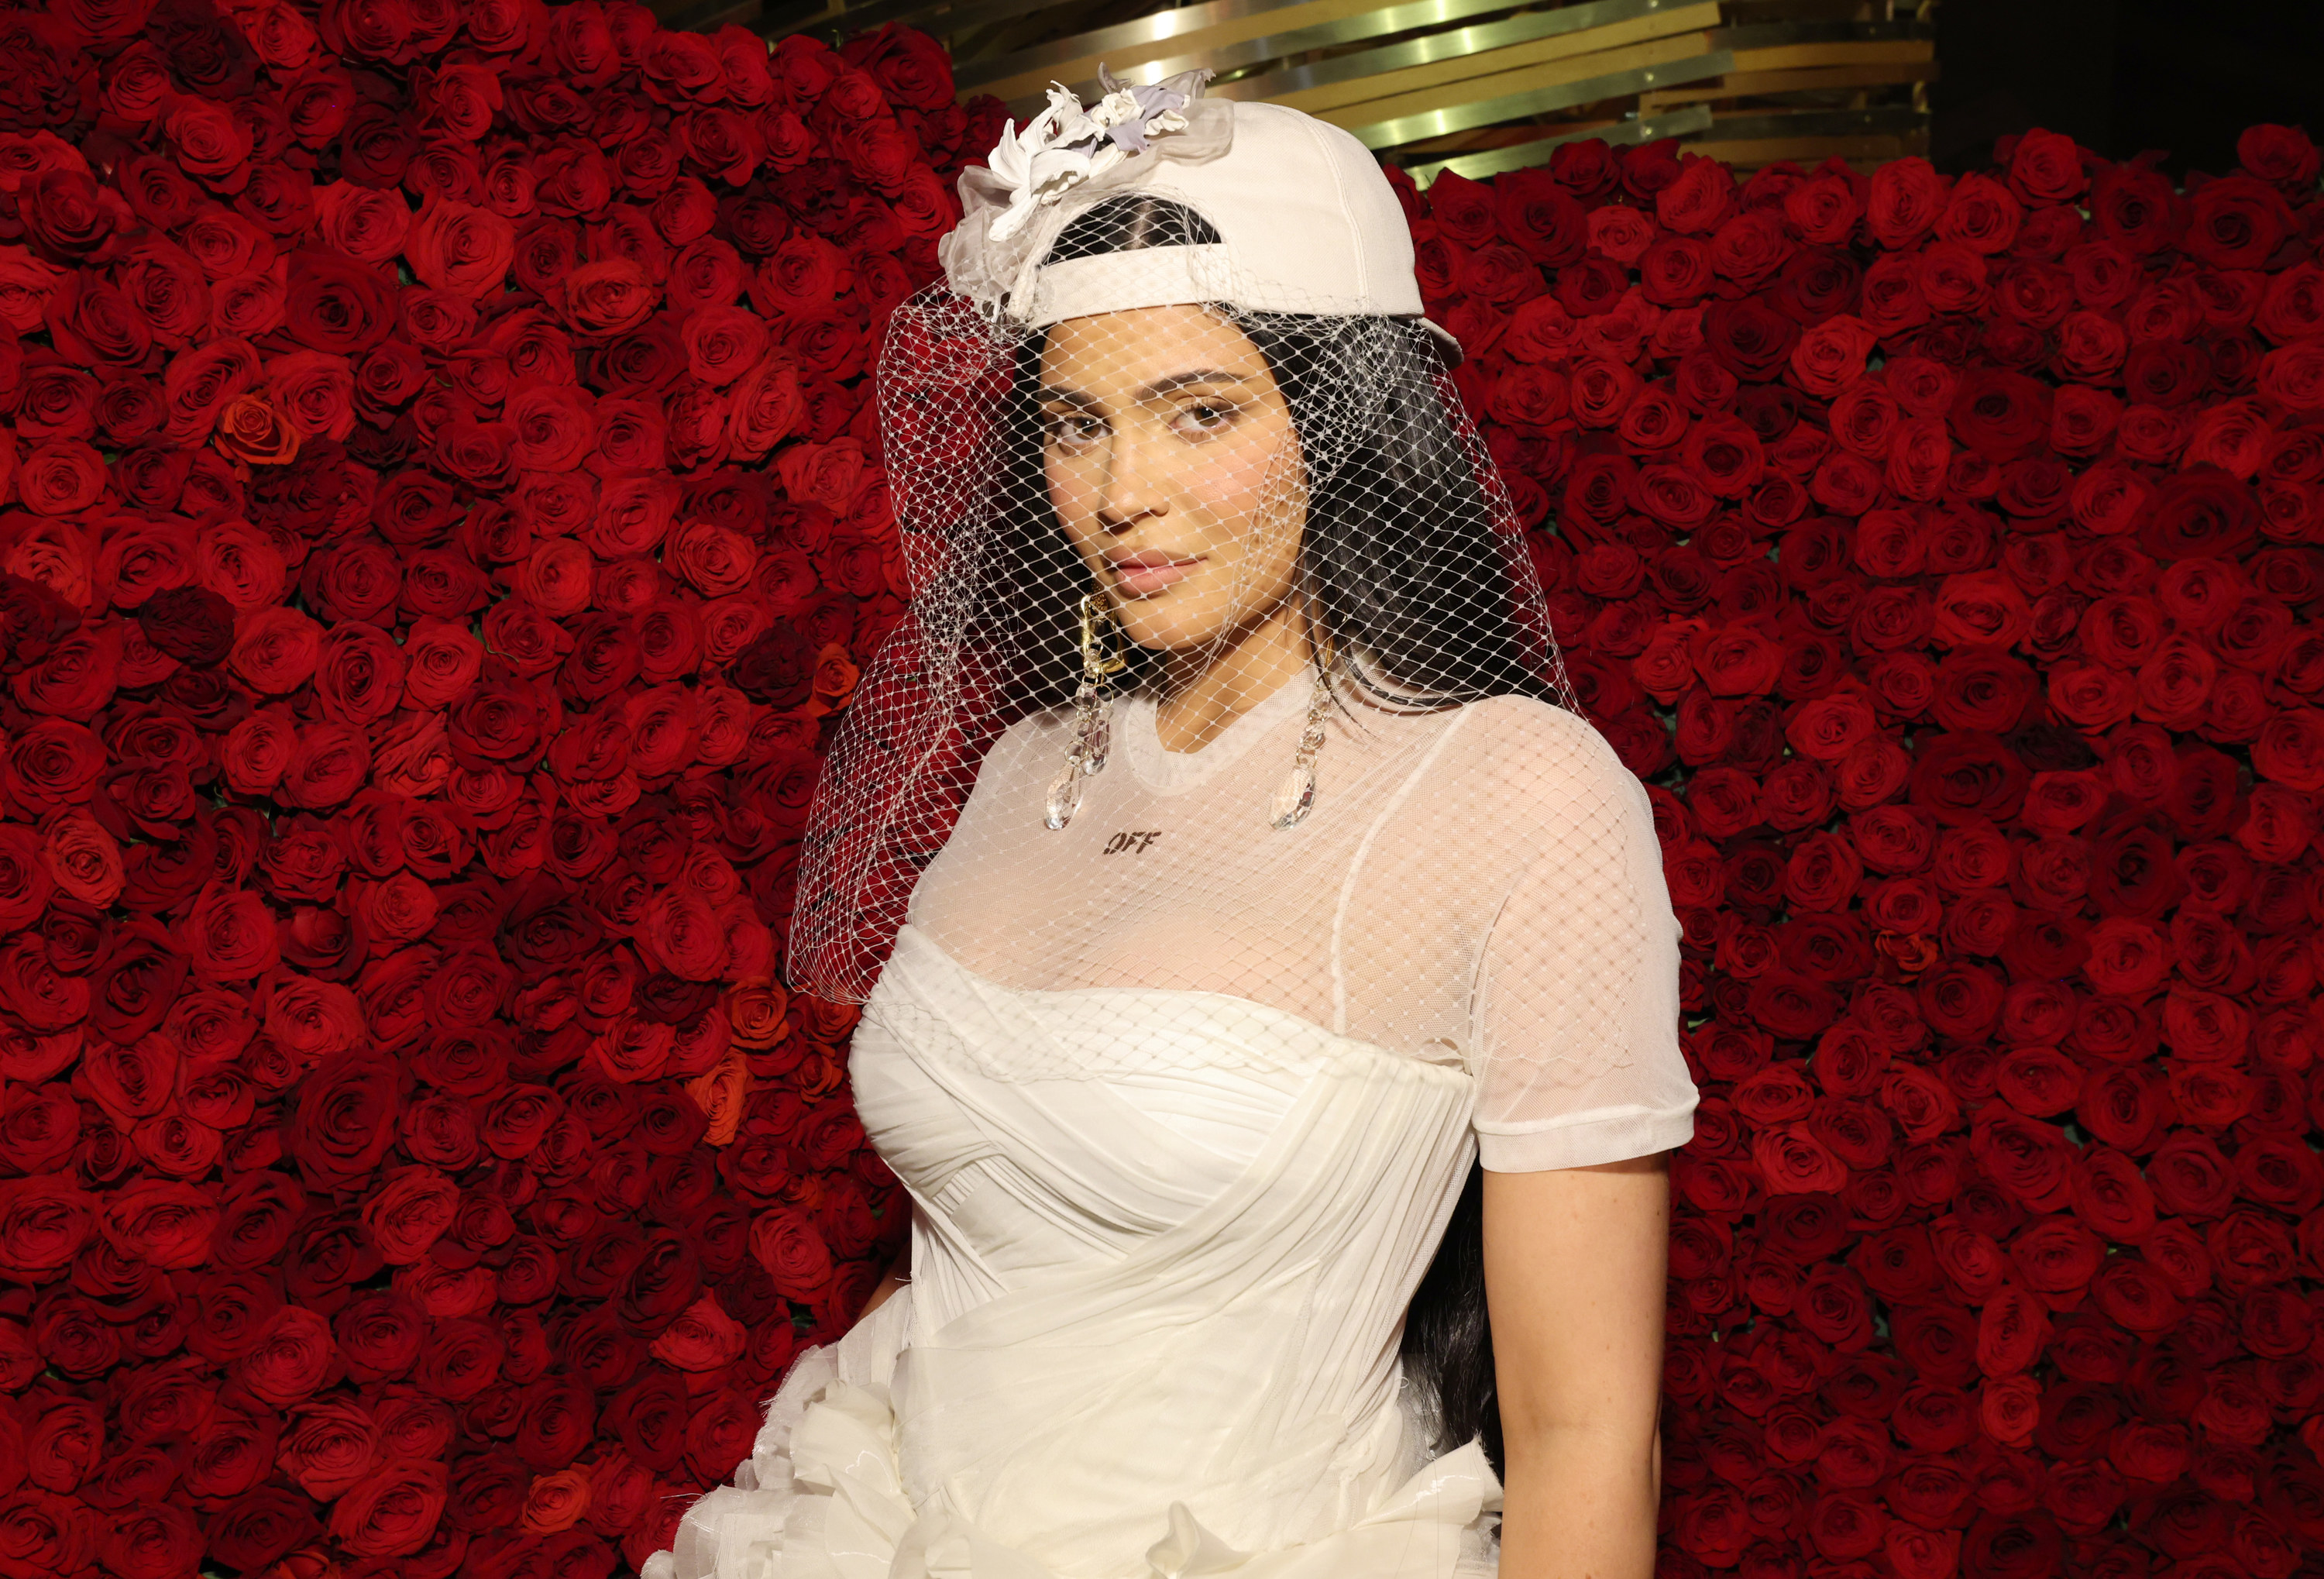 Jenner at the 2022 Met Gala in a white dress, baseball cap and wedding veil